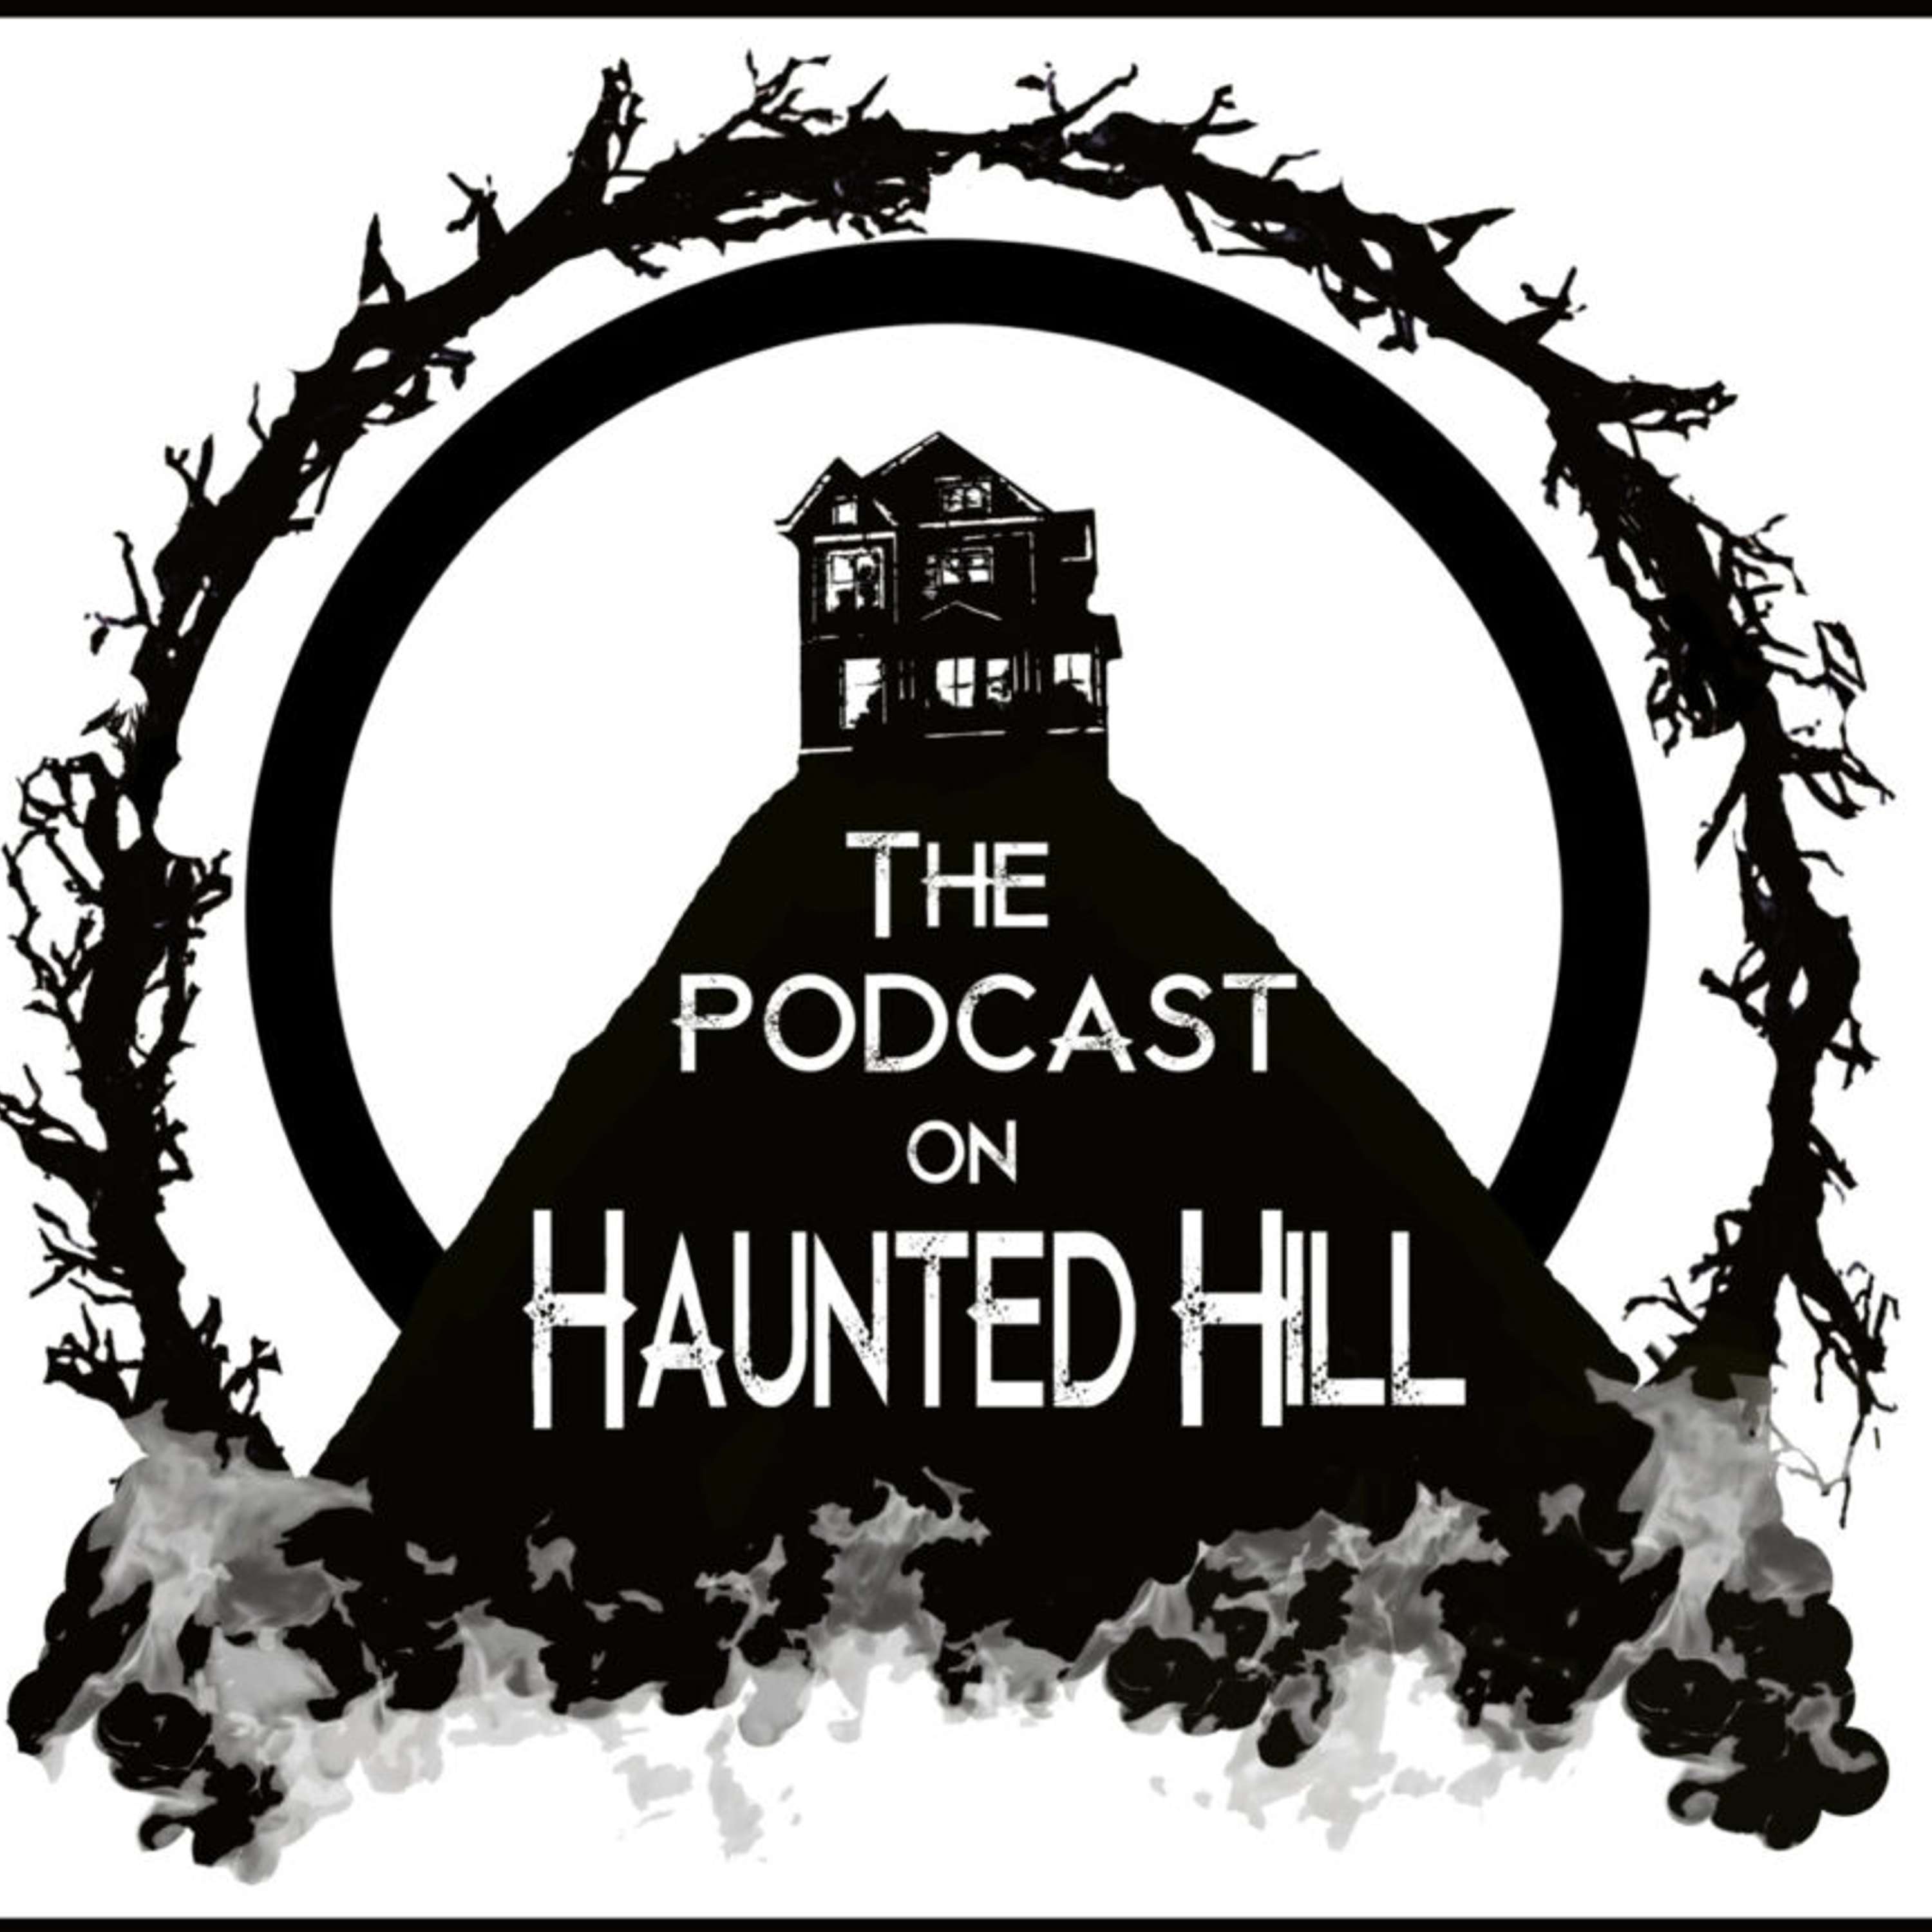 THE PODCAST ON HAUNTED HILL EPISODE 122 – DRACULA AND HANSEL AND GRETAL